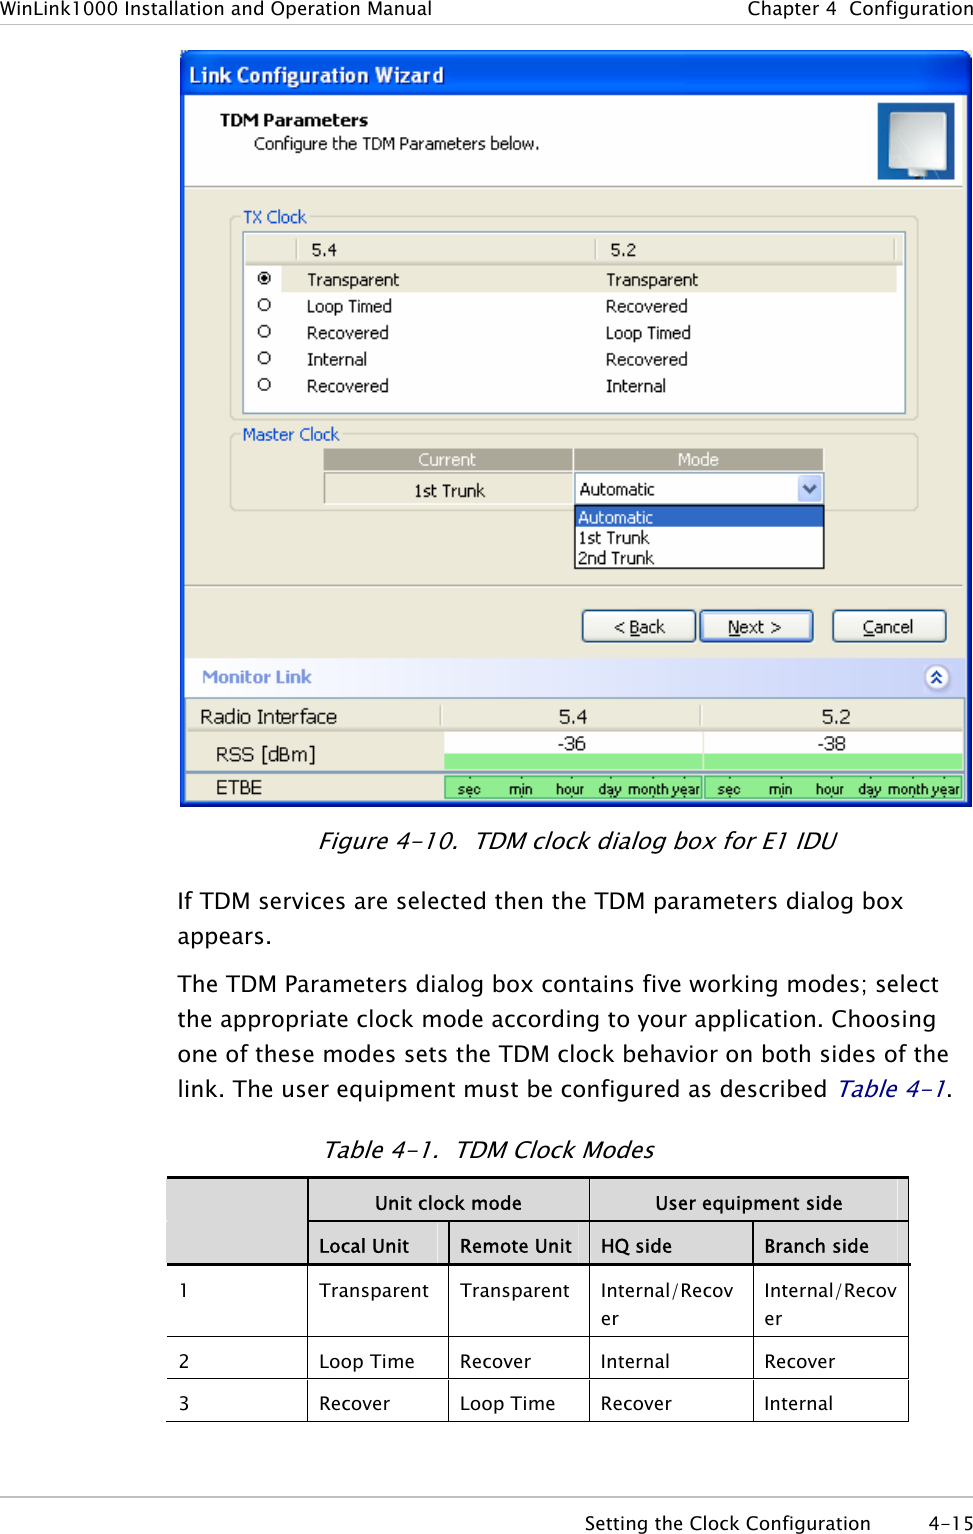 WinLink1000 Installation and Operation Manual  Chapter  4  Configuration  Figure  4-10.  TDM clock dialog box for E1 IDU If TDM services are selected then the TDM parameters dialog box appears. The TDM Parameters dialog box contains five working modes; select the appropriate clock mode according to your application. Choosing one of these modes sets the TDM clock behavior on both sides of the link. The user equipment must be configured as described Table  4-1. Table  4-1.  TDM Clock Modes  Unit clock mode  User equipment side  Local Unit  Remote Unit  HQ side  Branch side 1  Transparent Transparent Internal/Recover Internal/Recover 2 Loop Time Recover Internal Recover 3 Recover Loop Time Recover Internal   Setting the Clock Configuration  4-15 